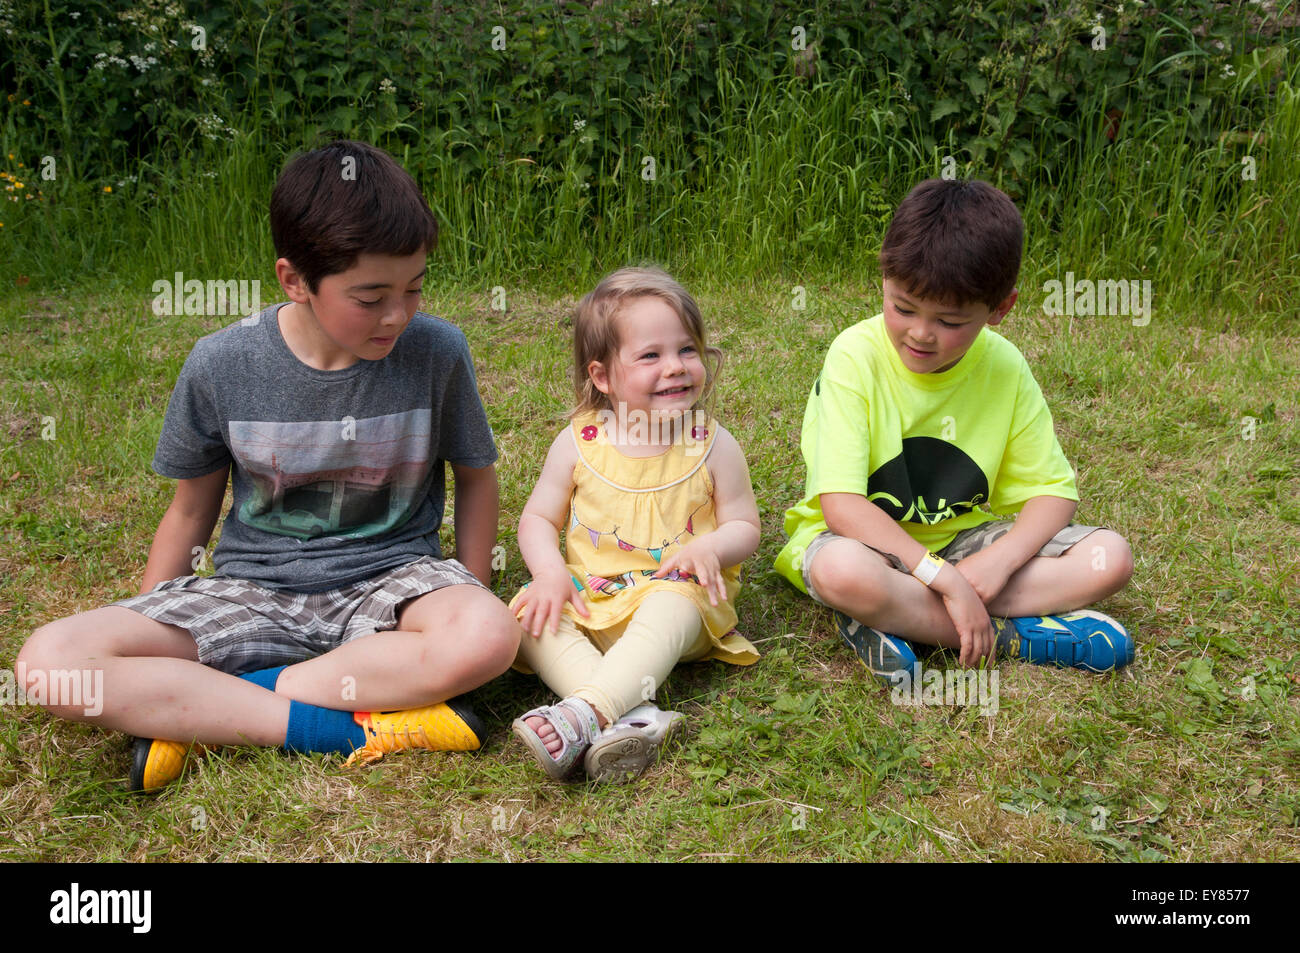 Little girl smiling, sitting on the grass with two boys Stock Photo